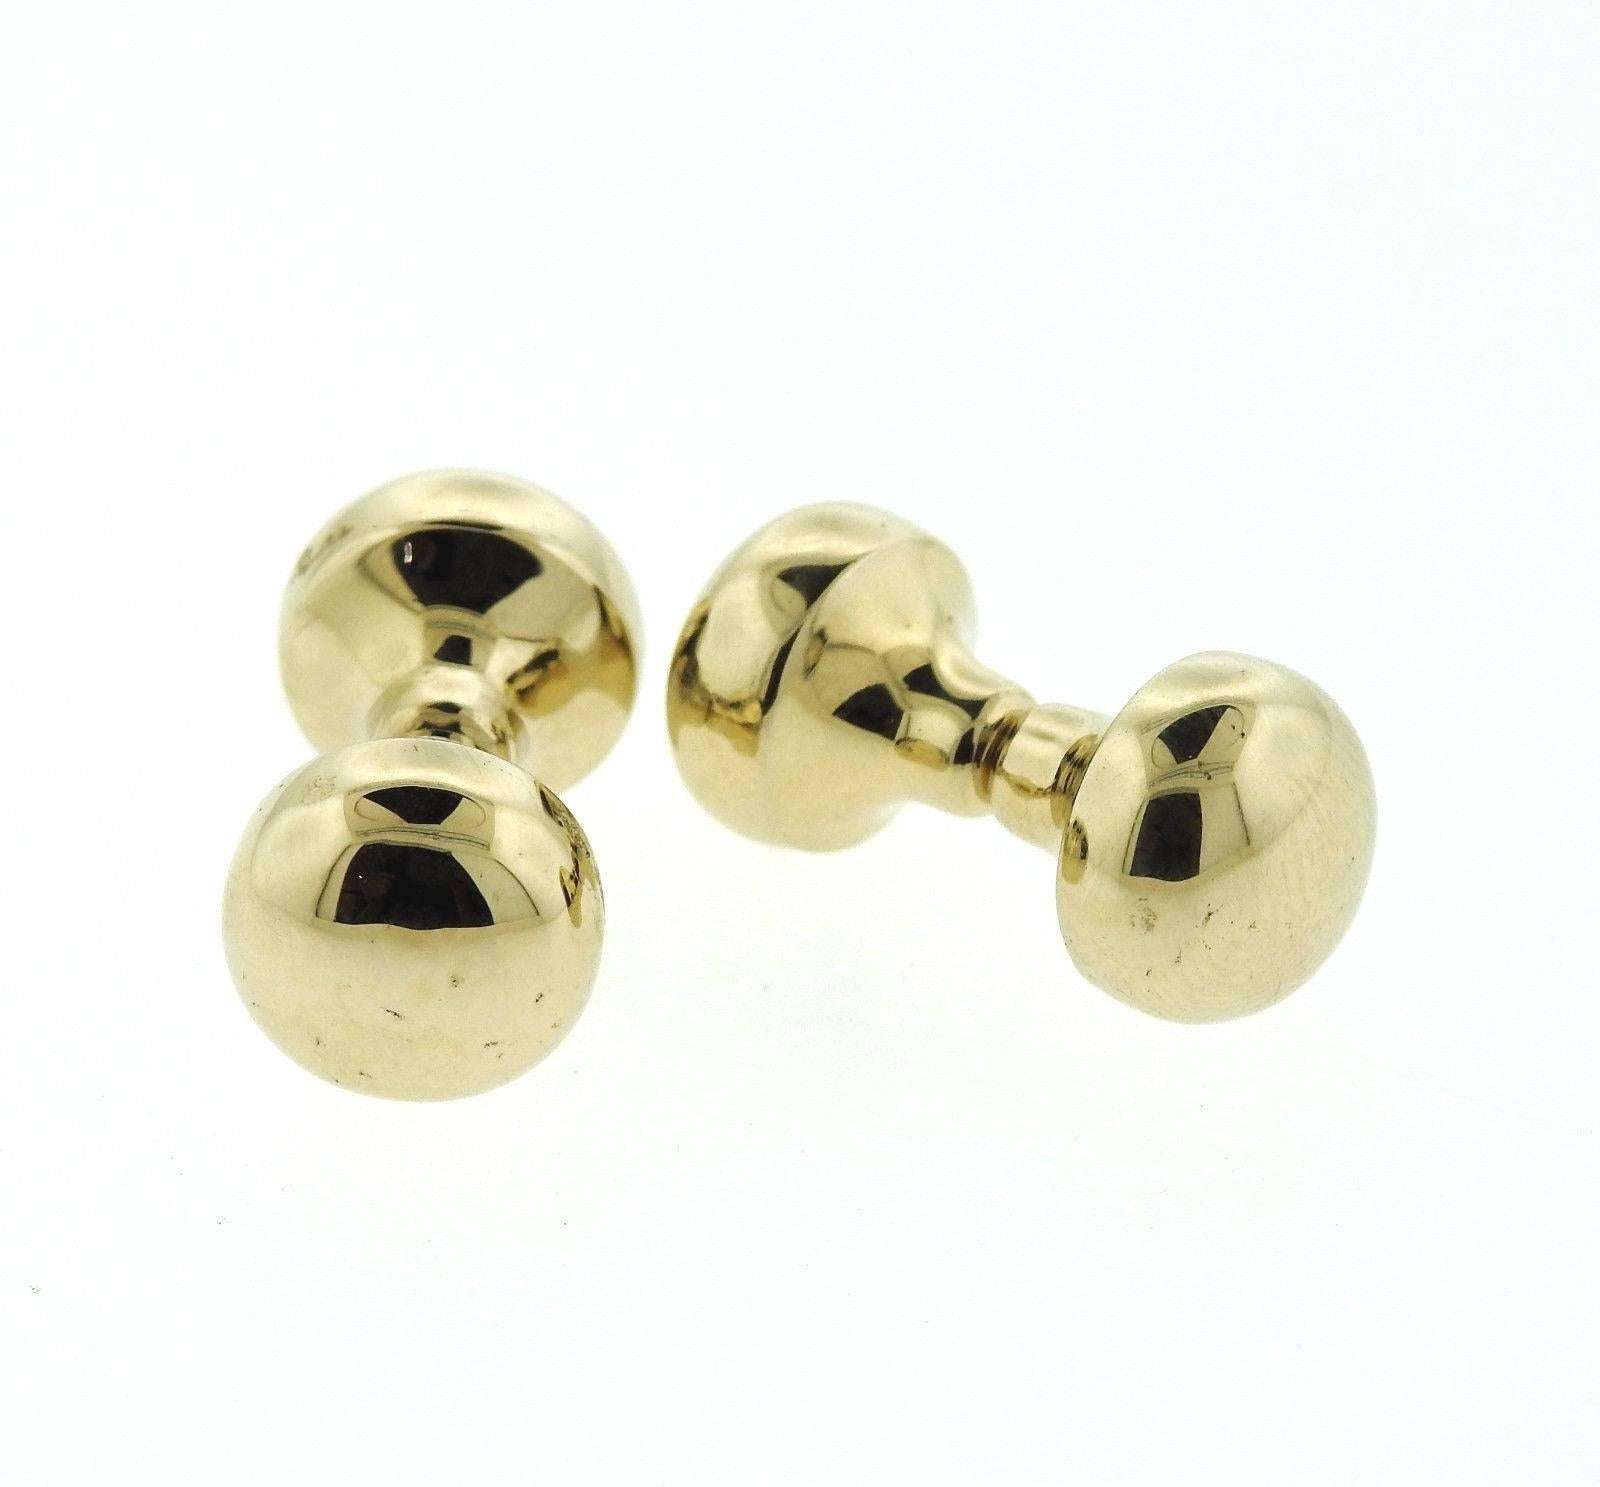 A pair of 18k gold cufflinks by Pomellato.  Each top measures 11.4mm in diameter.  The cufflinks weigh 14.8 grams.  Marked: 750, Pomellato